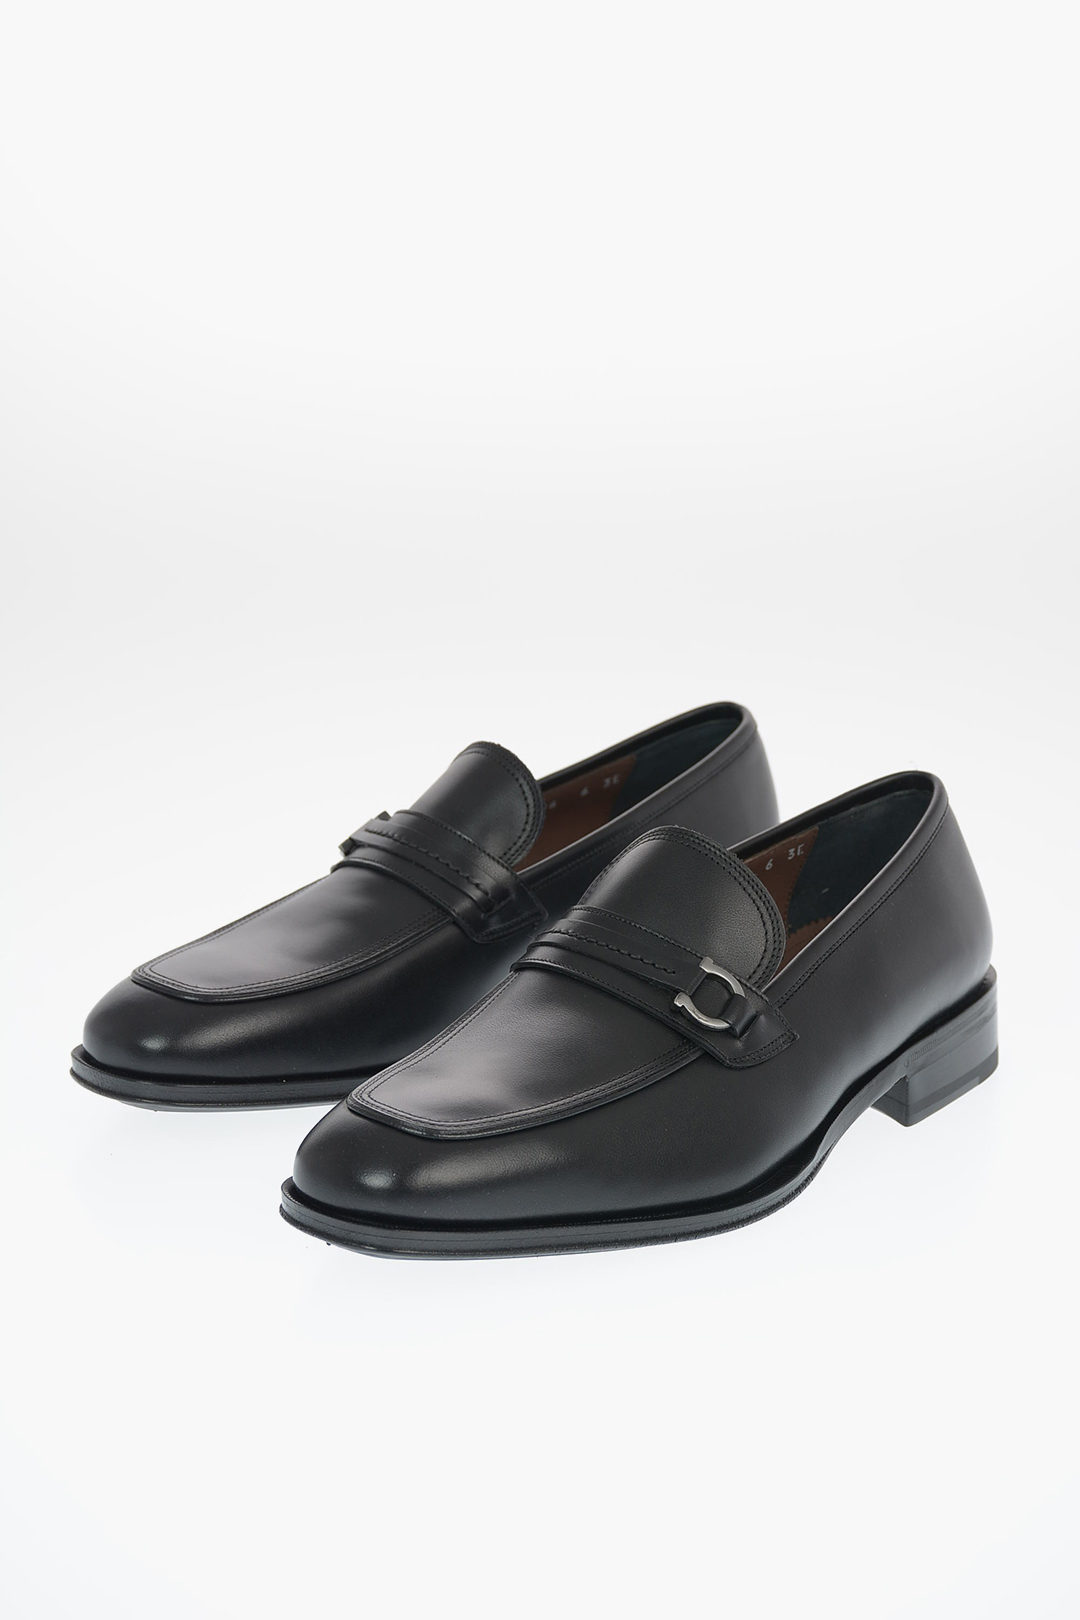 Buy > ferragamo mens shoes outlet > in stock